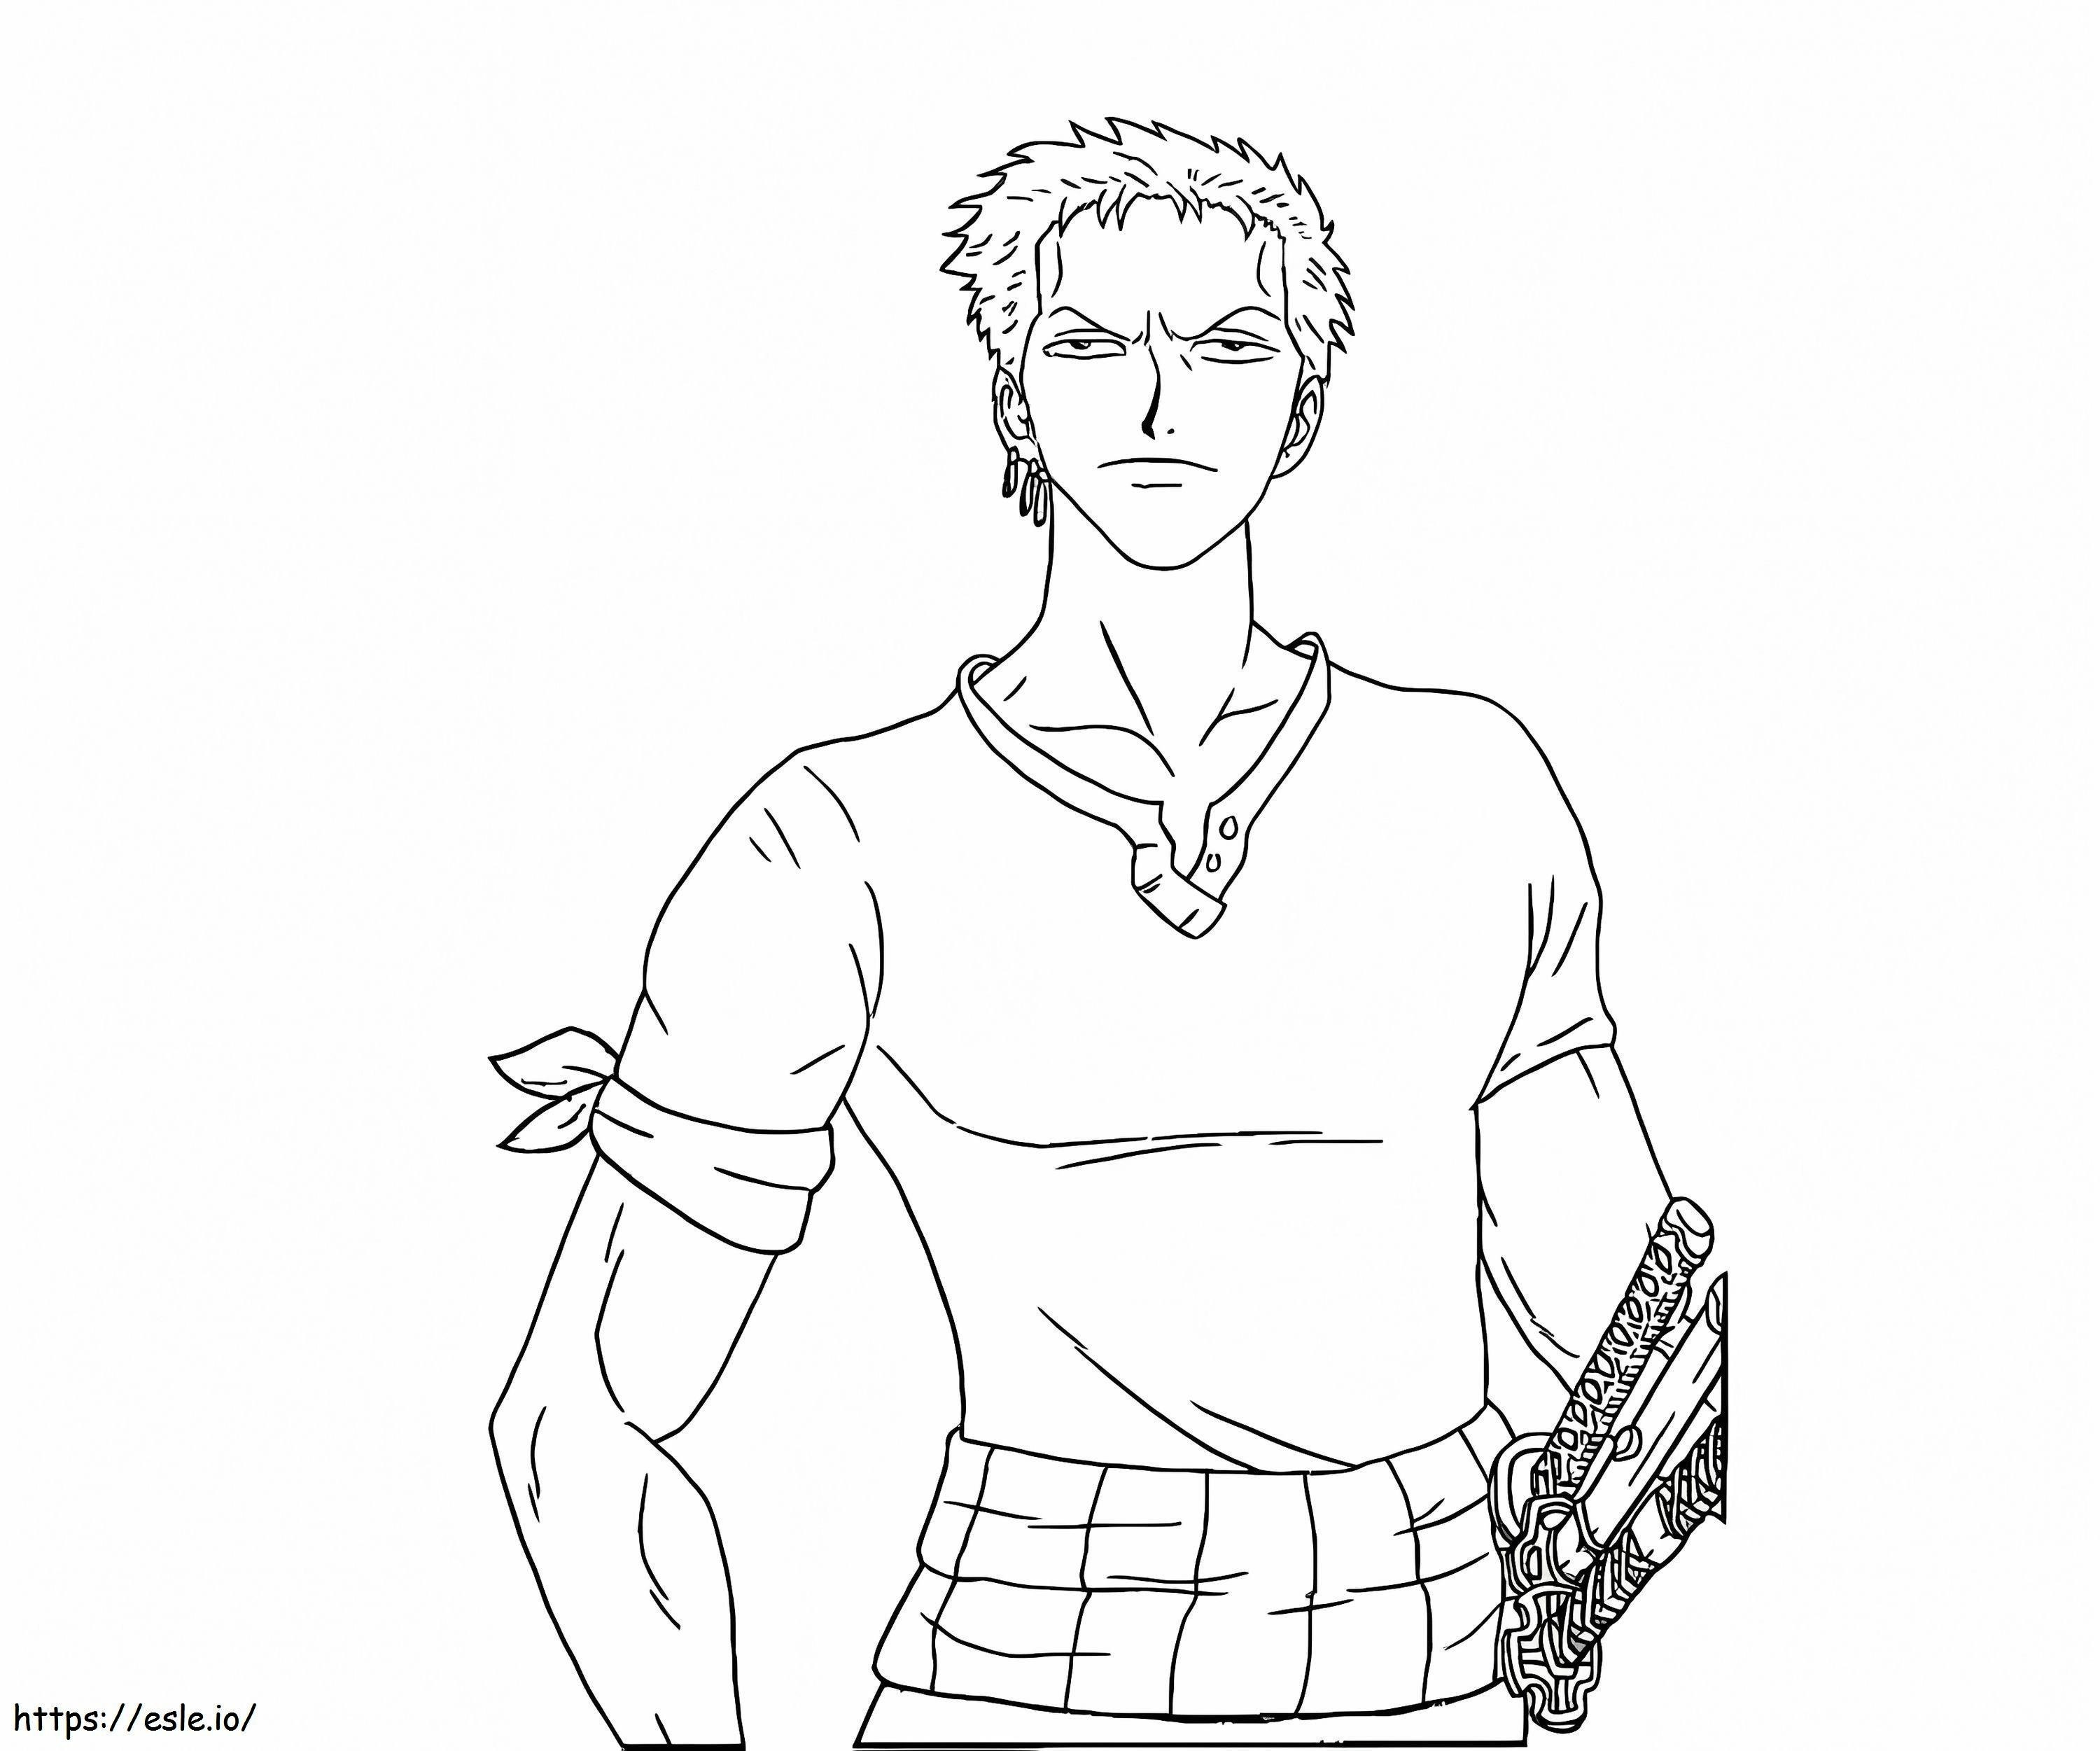 Stupid Zoro coloring page